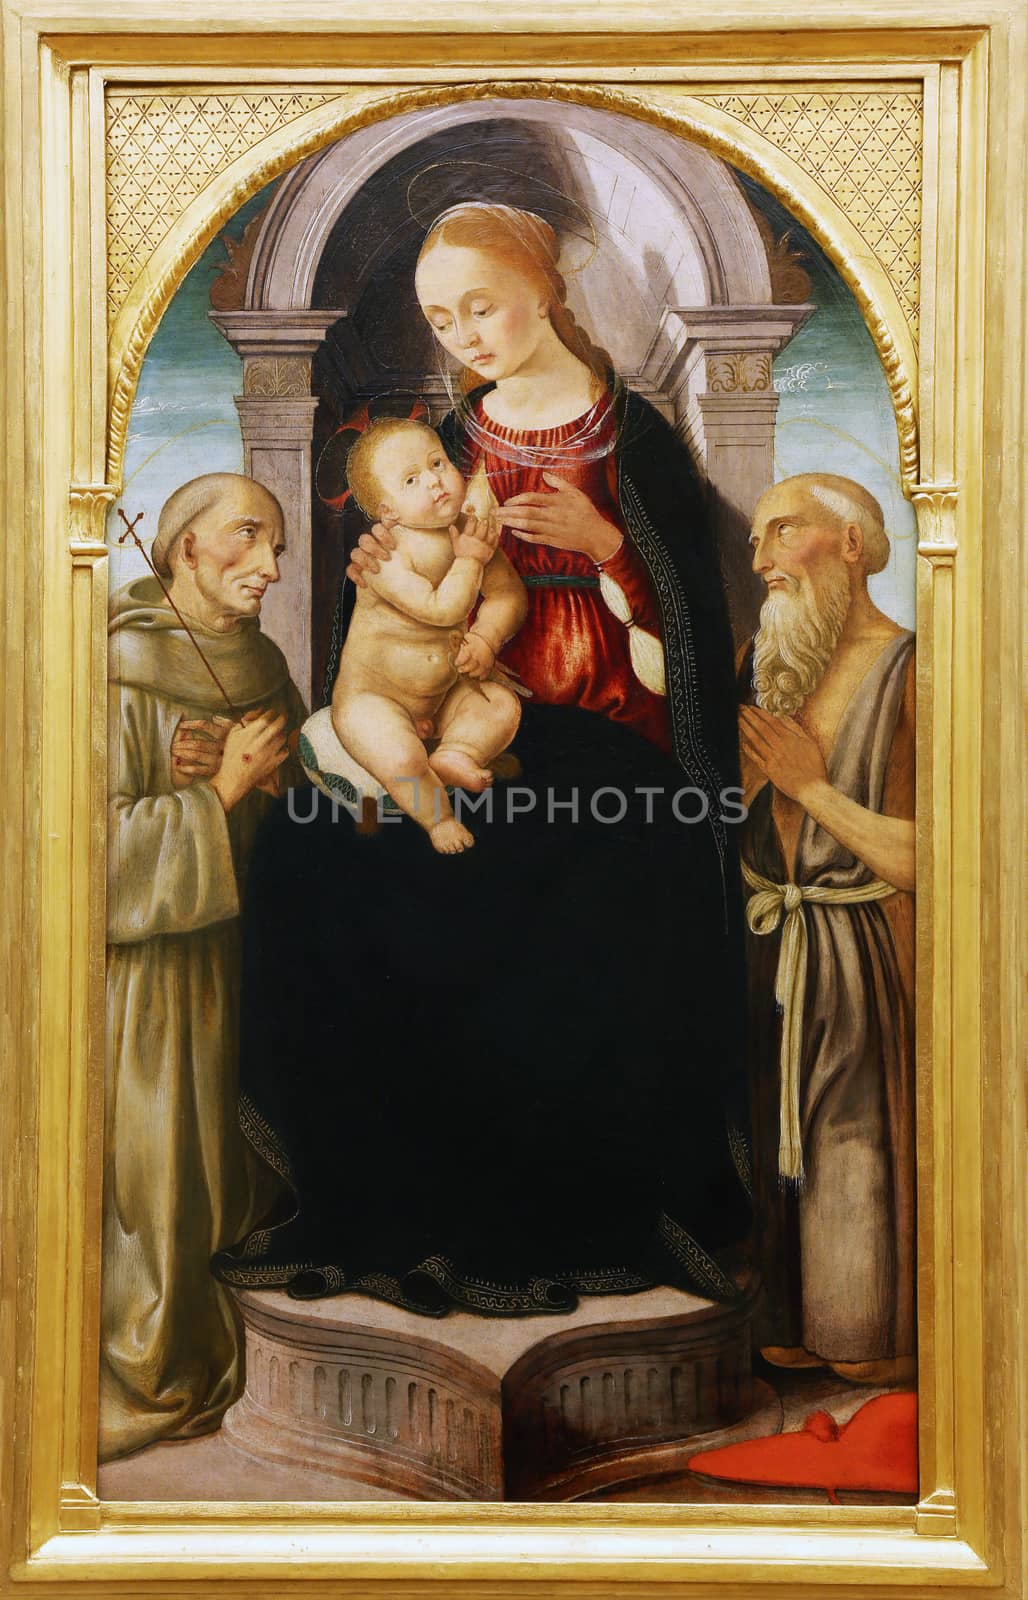 Biagio d'Antonio Tucci: Madonna and Child with St. Francis and Jerome, Old Masters Collection, Croatian Academy of Sciences in Zagreb, Croatia